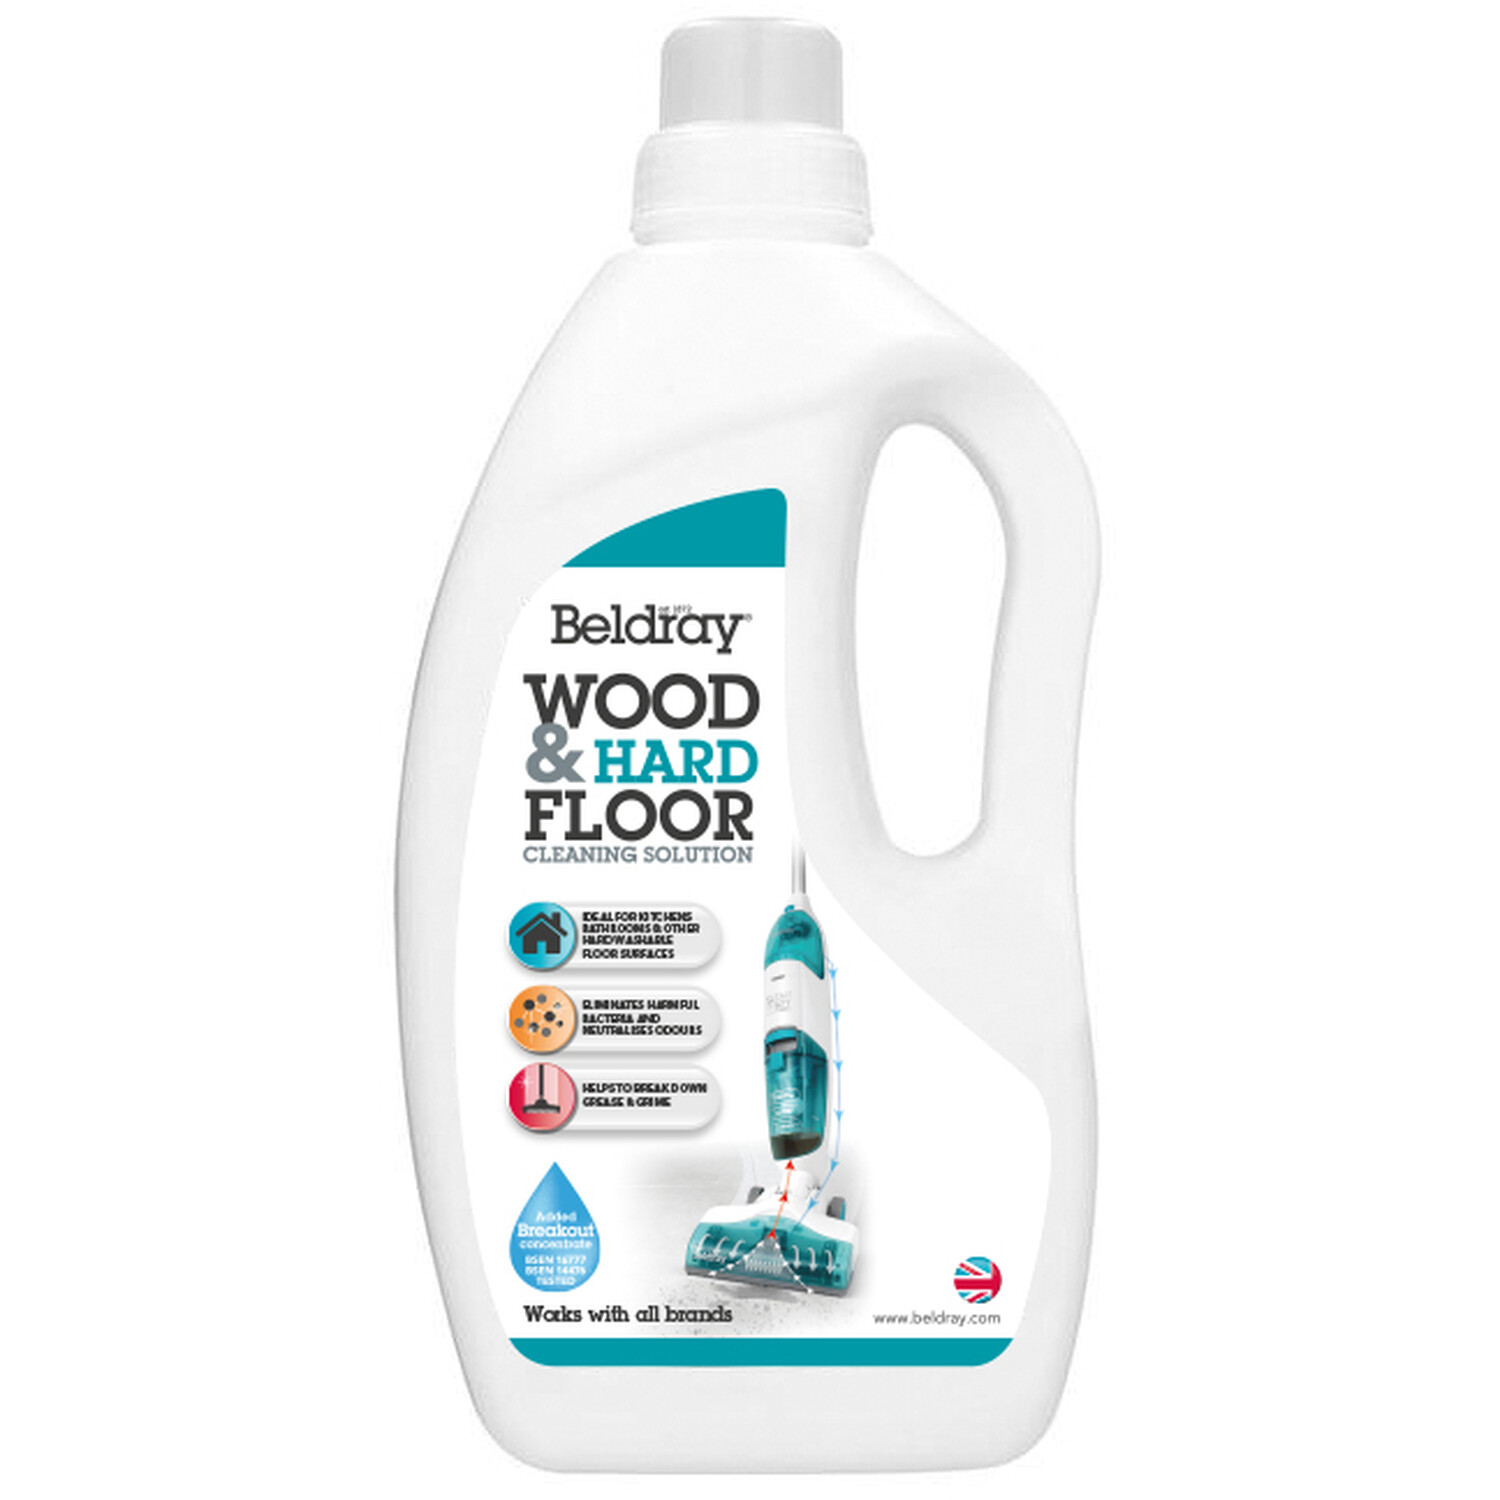 Beldray Wood and Hard Floor Cleaning Solution Image